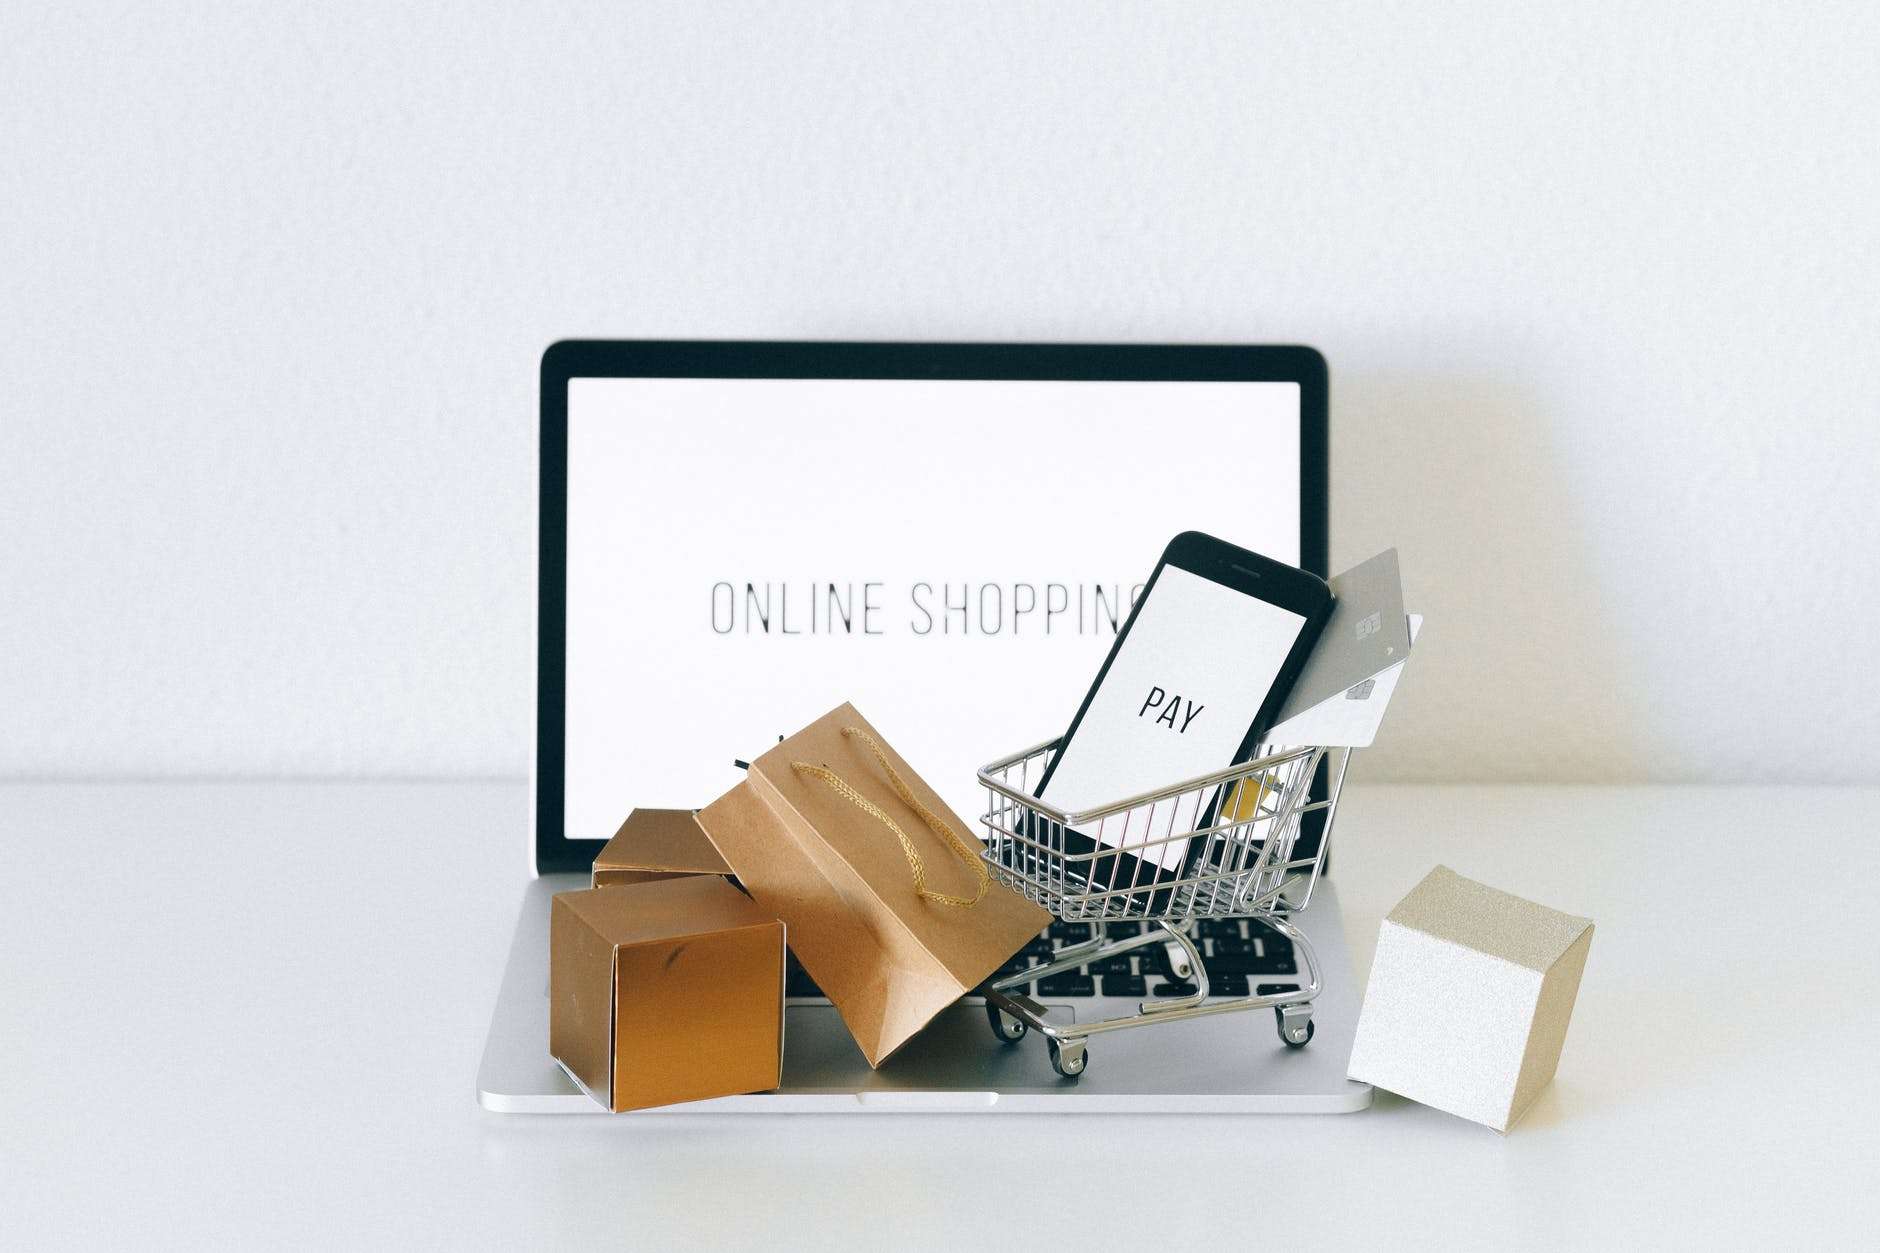 What Makes a Good Ecommerce Experience?